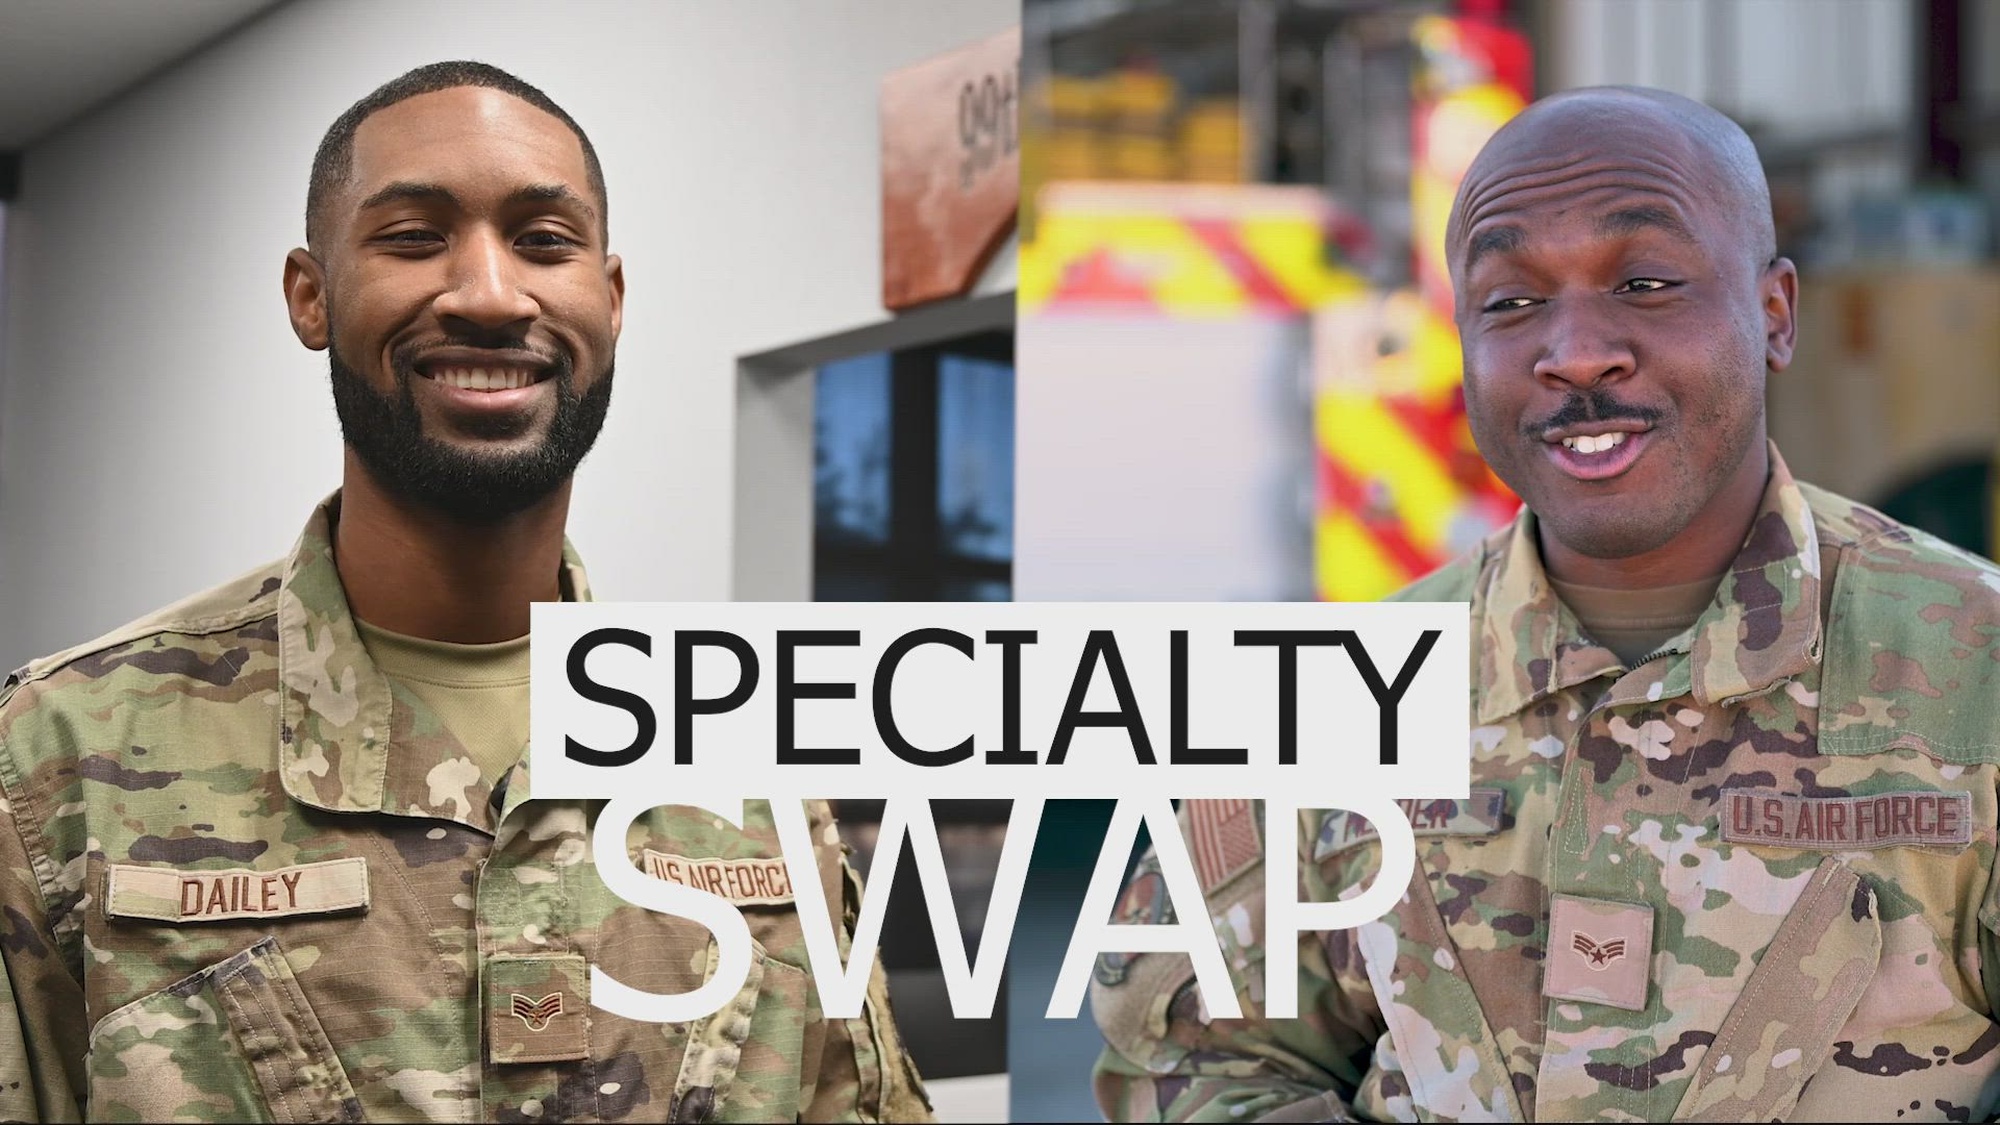 Specialty Swap is a series that provides an opportunity for Airmen to learn about and experience firsthand other career fields within the Air Force.